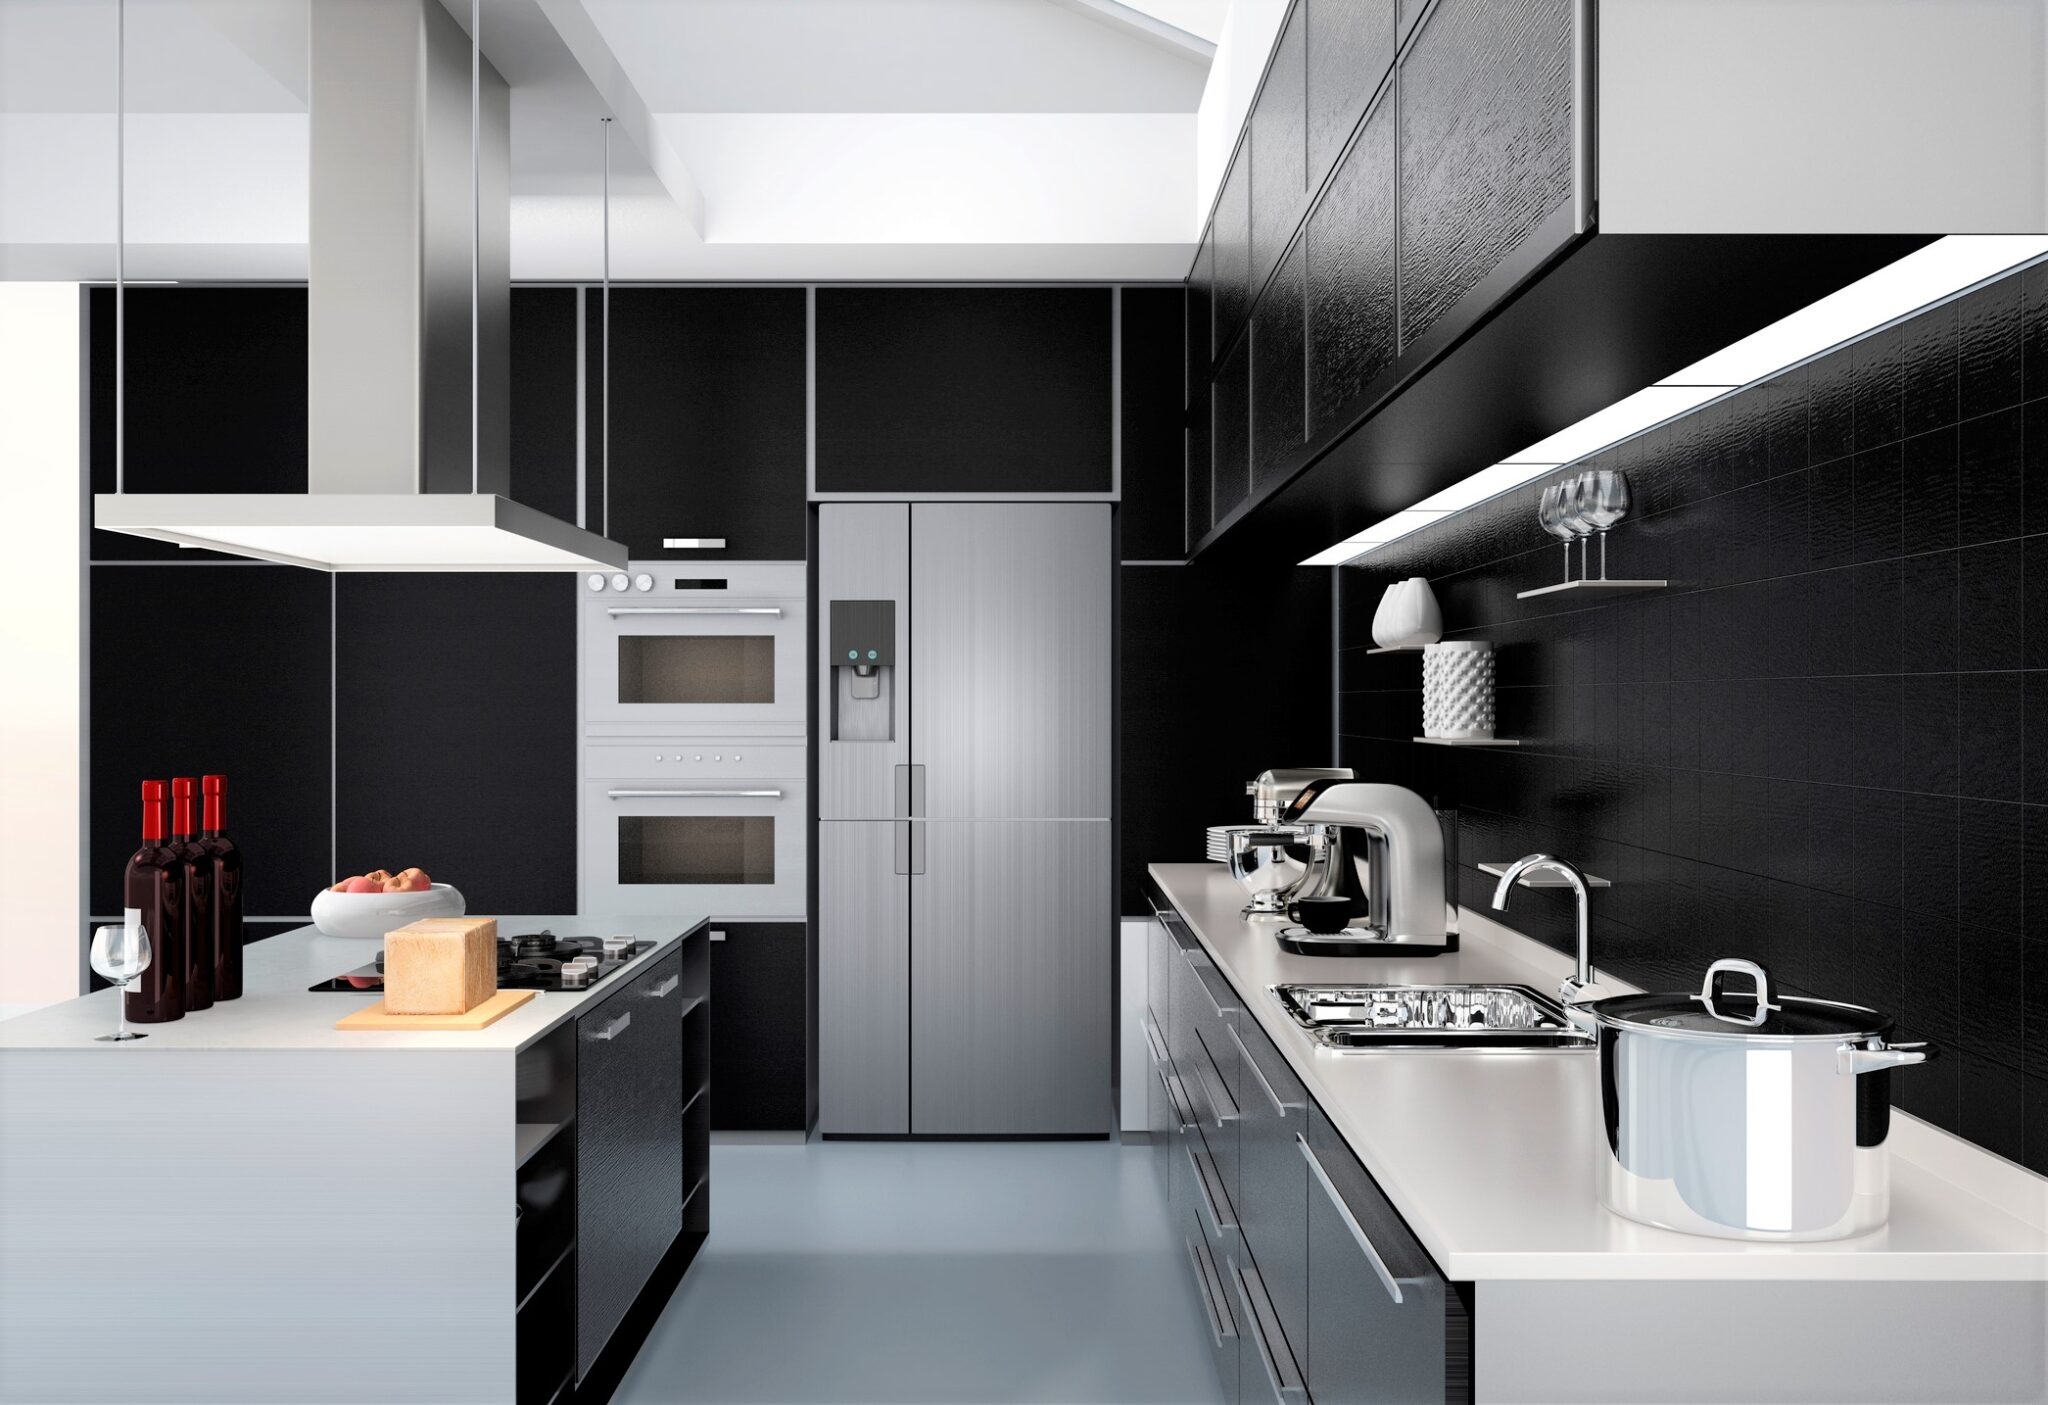 A black, white, and silver modern open kitchen. This article covers Kitchen Trends to Look For in 2022.